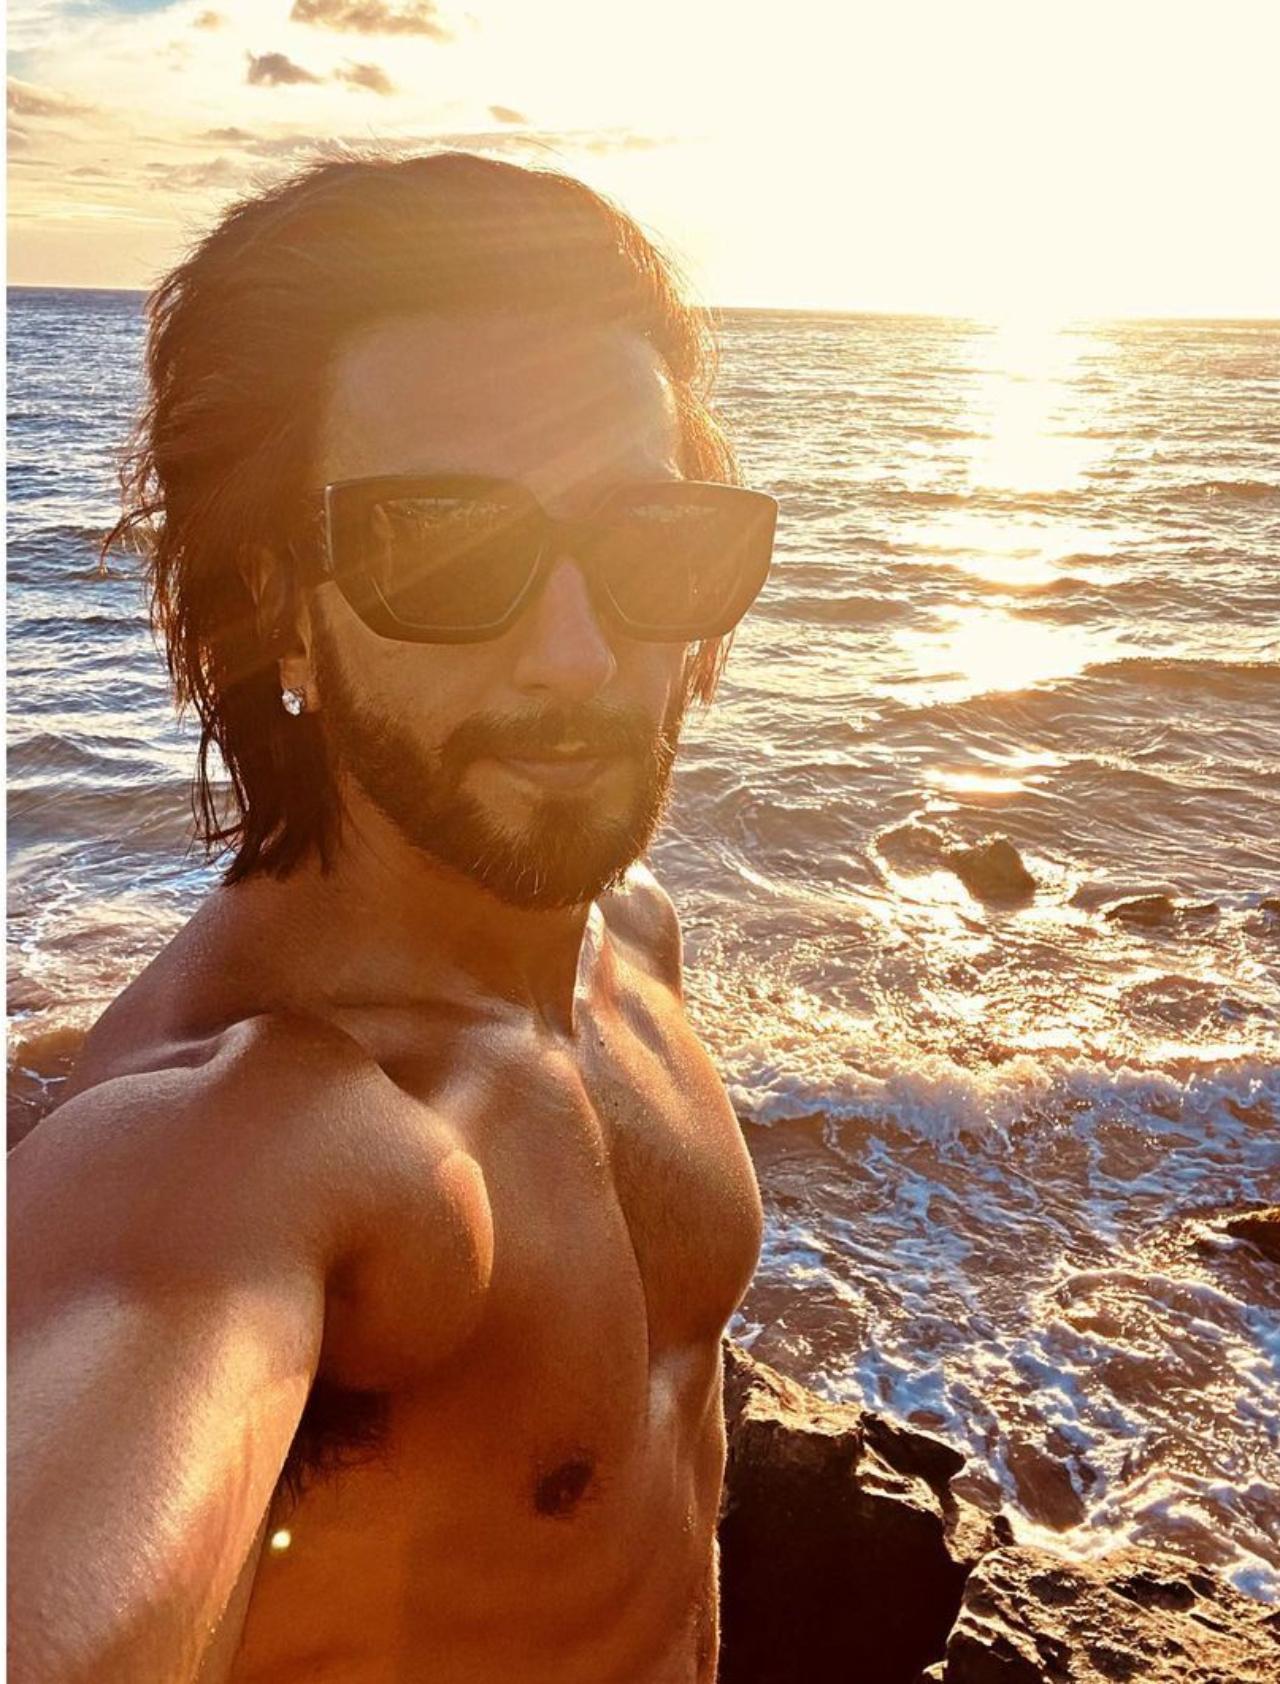 If you follow Ranveer and Deepika, you would know that the two celebrate special occasions like birthdays and anniversaries with a trip outside the city away from the chaos. They often embrace nature for their trips